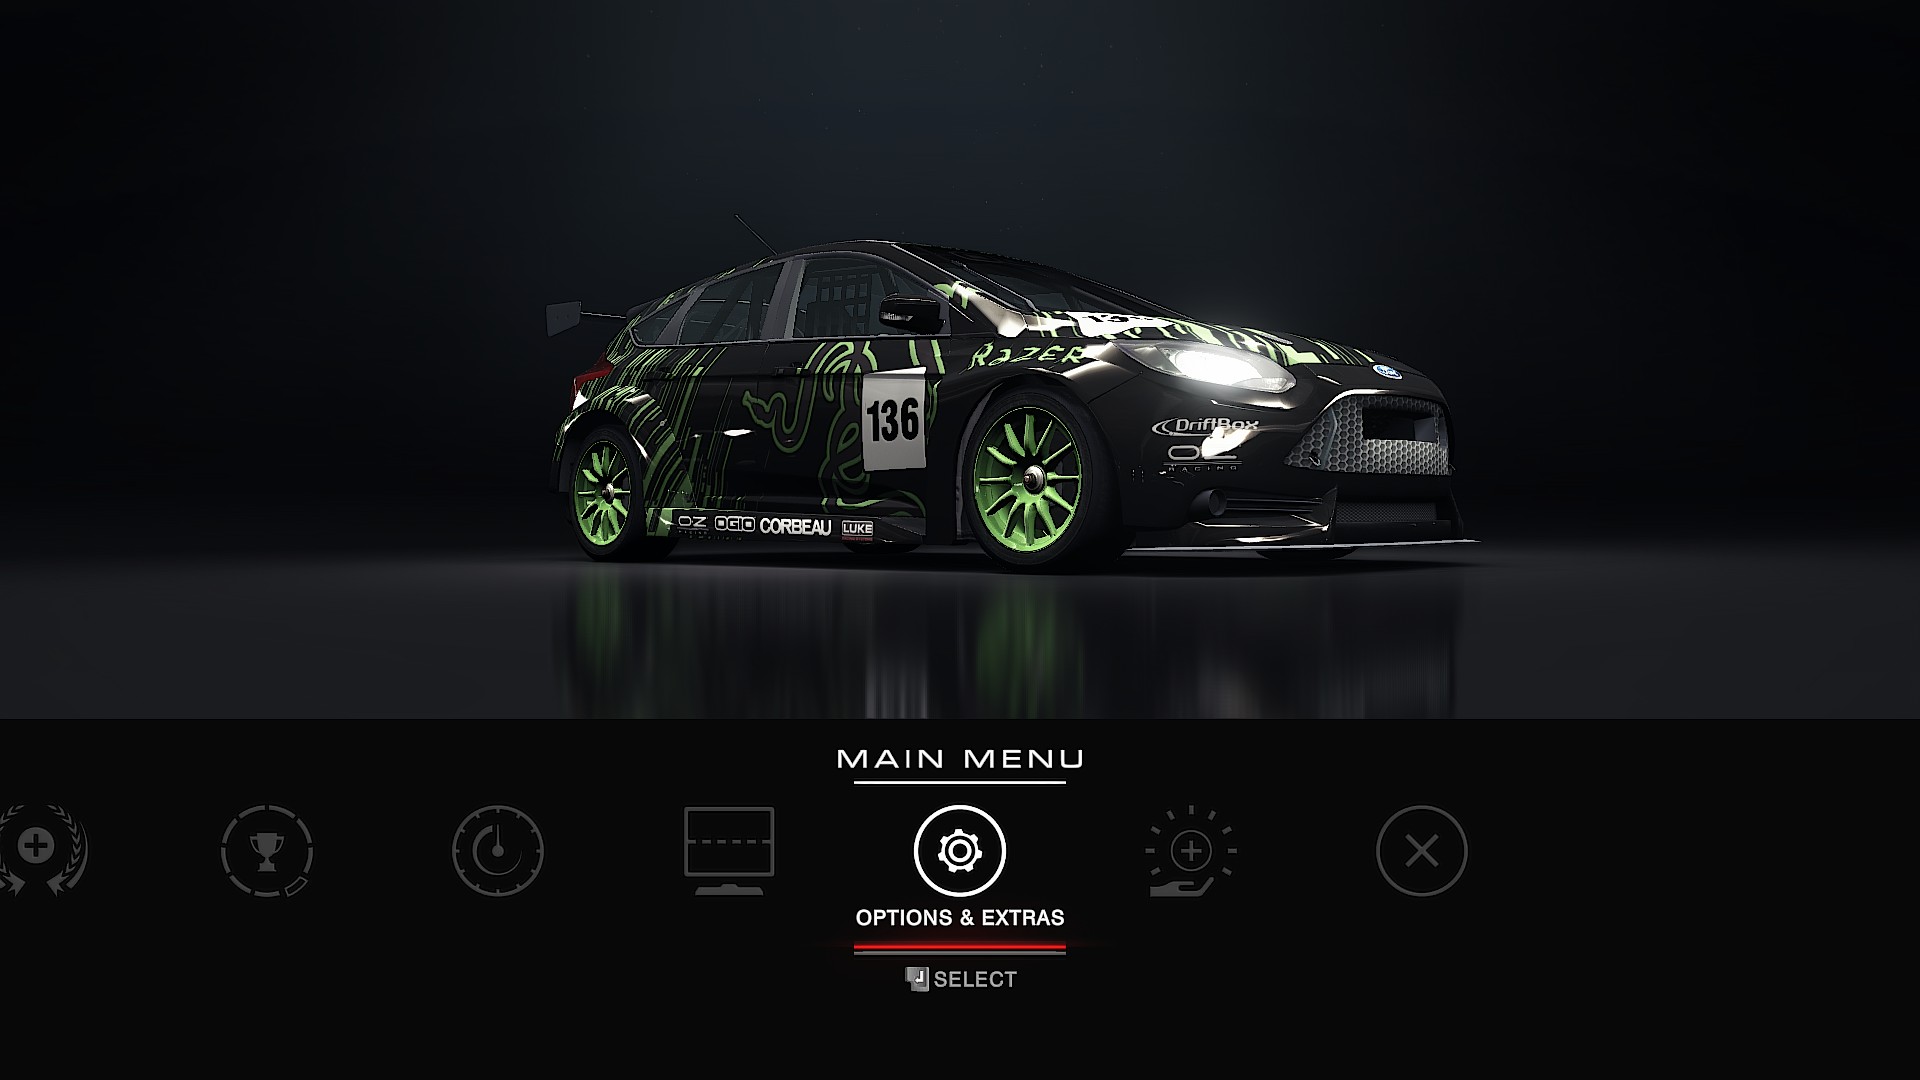 GRID Autosport for Android - Download